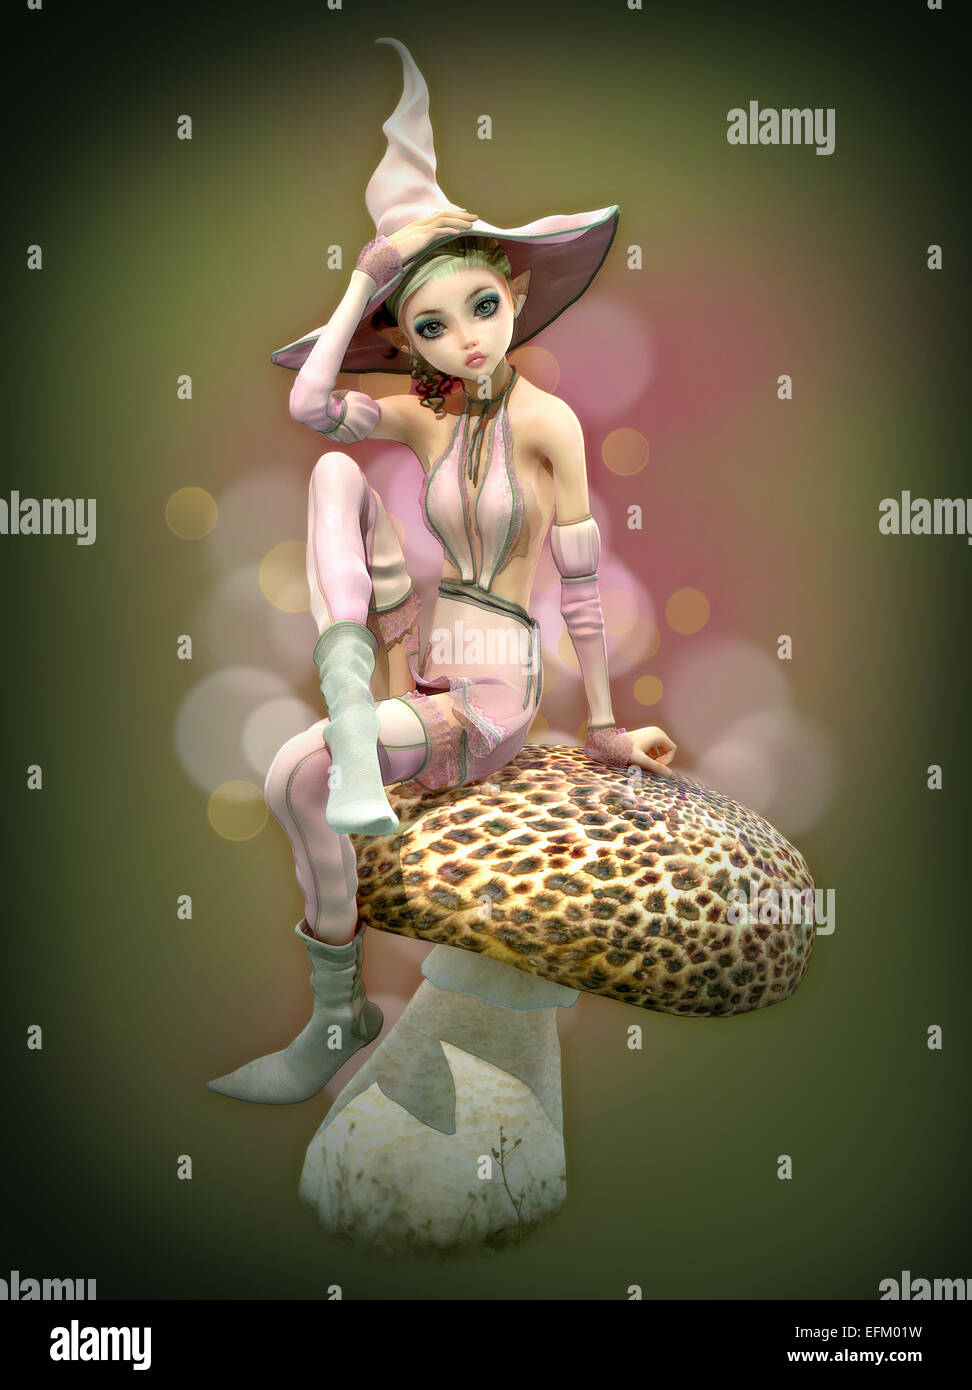 3d computer graphics of an elf with witch hat sitting on a mushroom Stock Photo